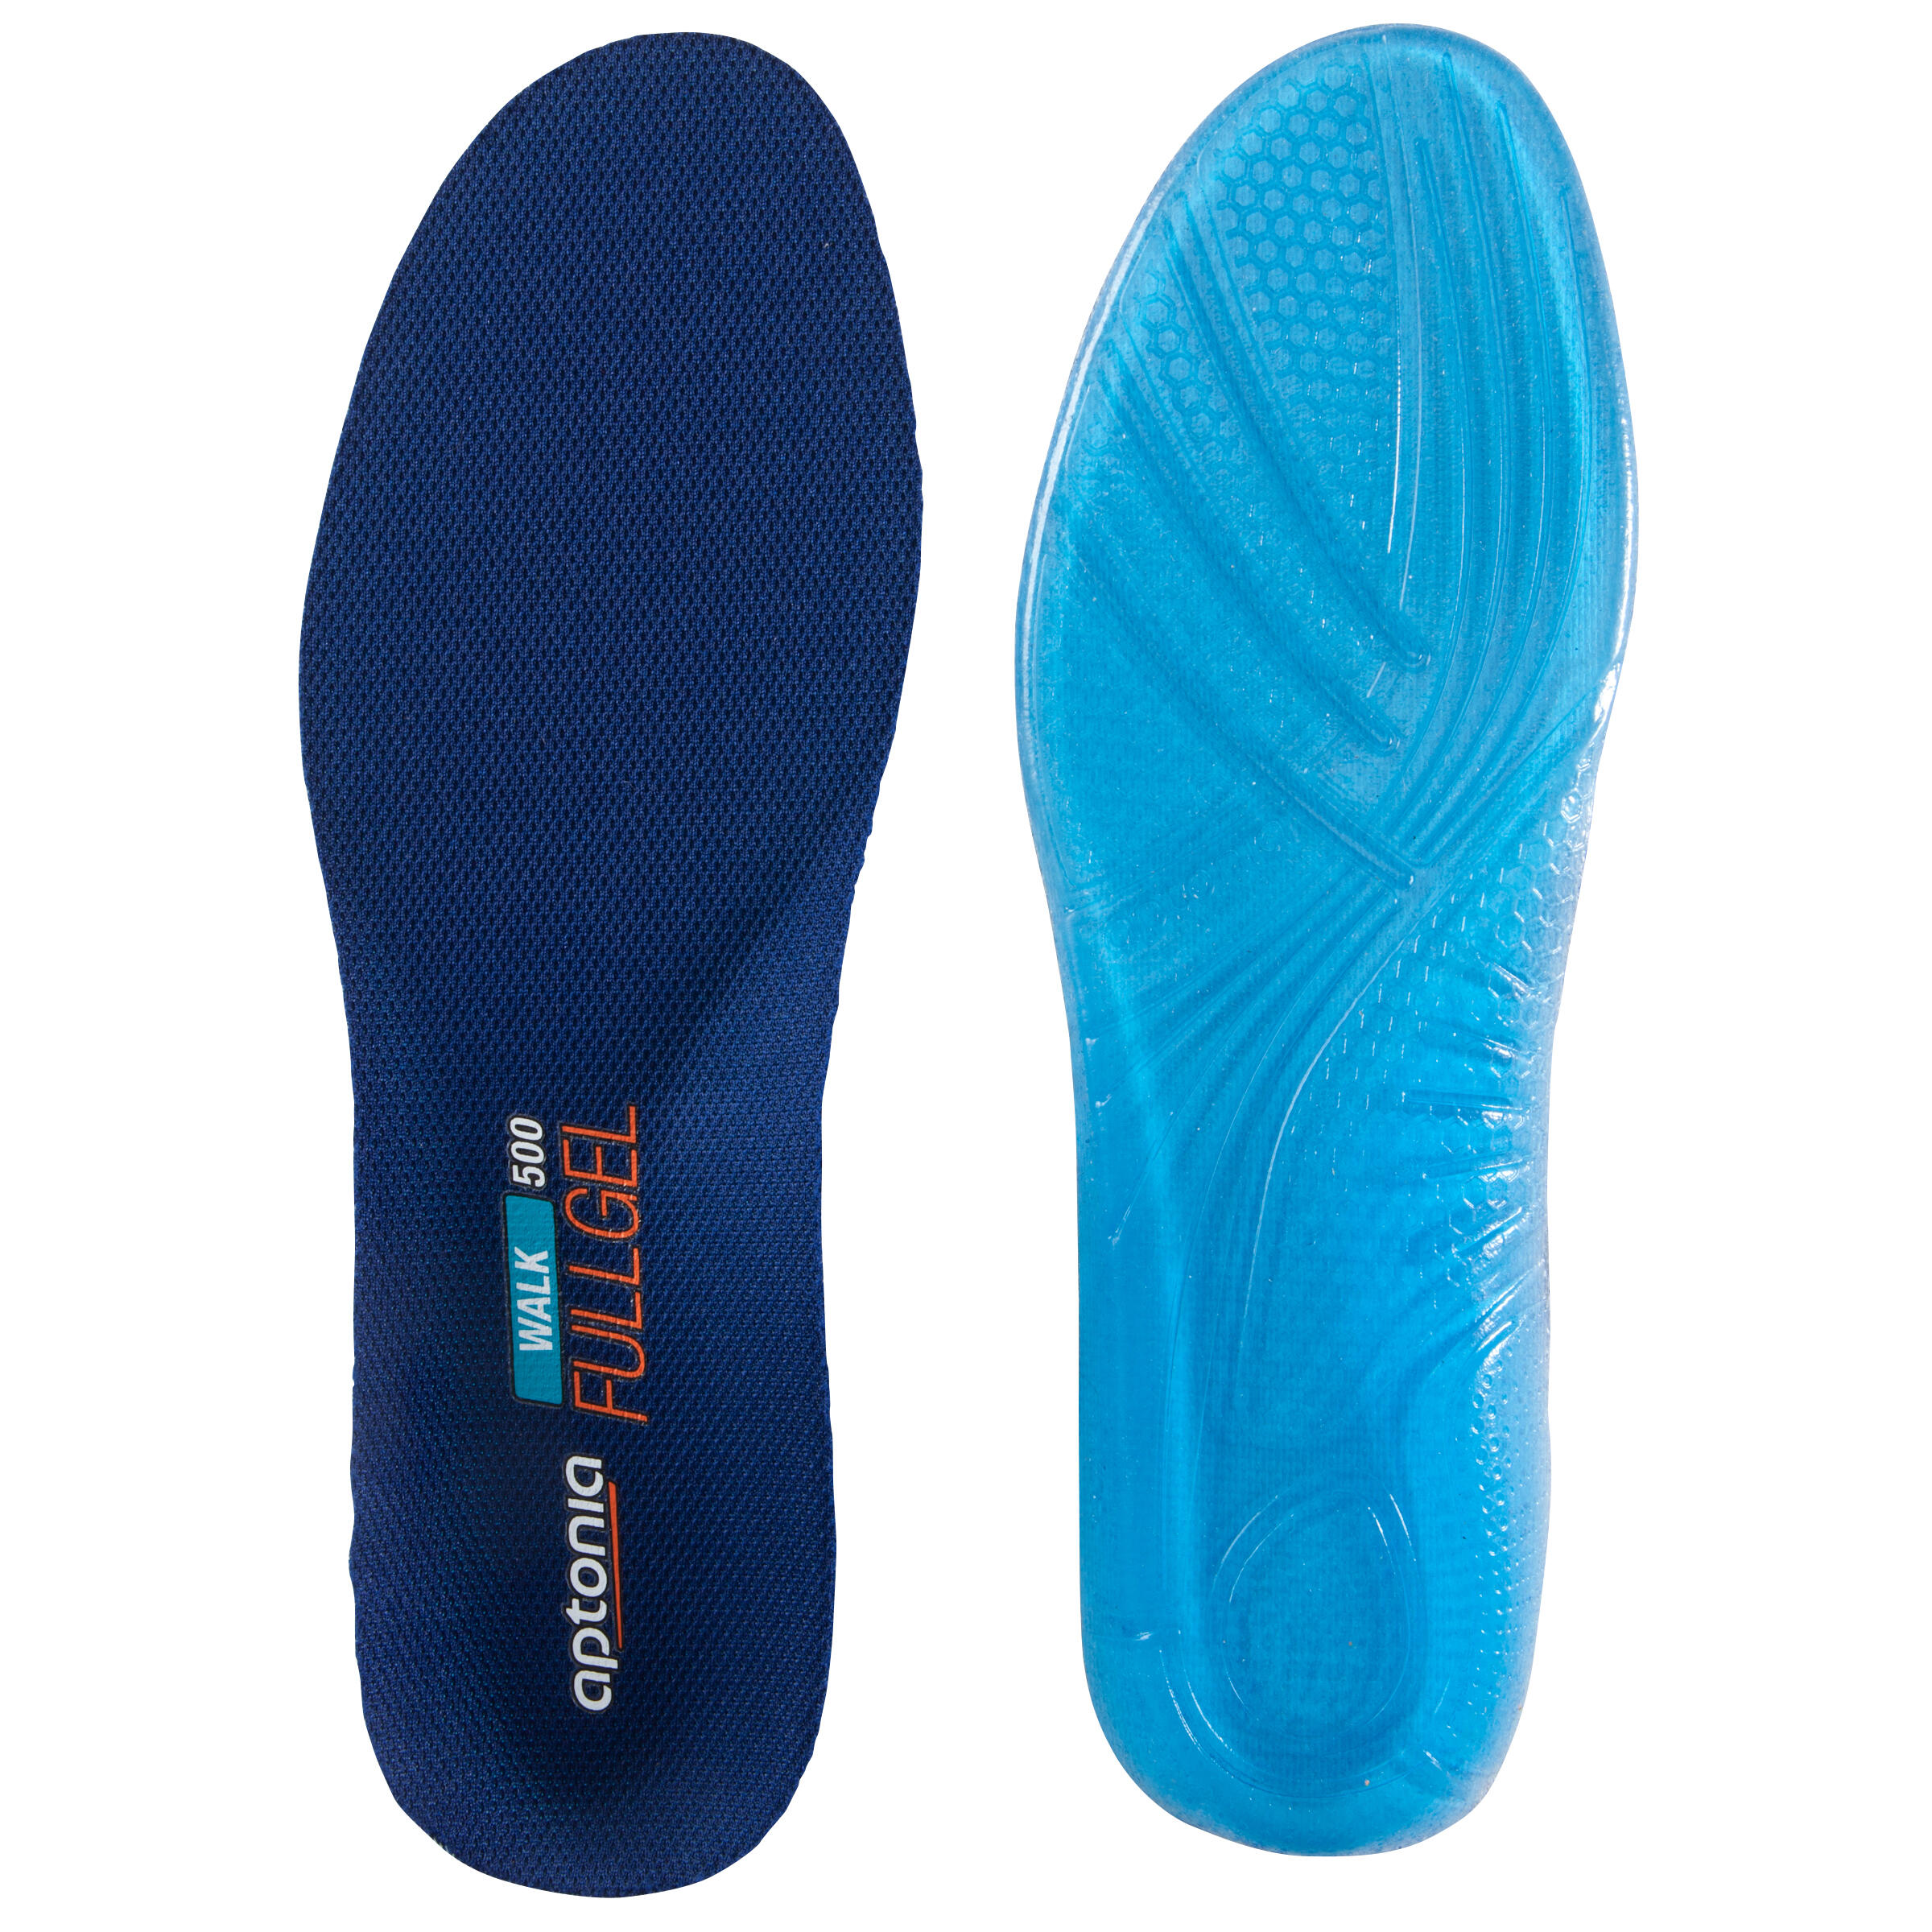 Buy Gel Insole for shoes Online |Shock 